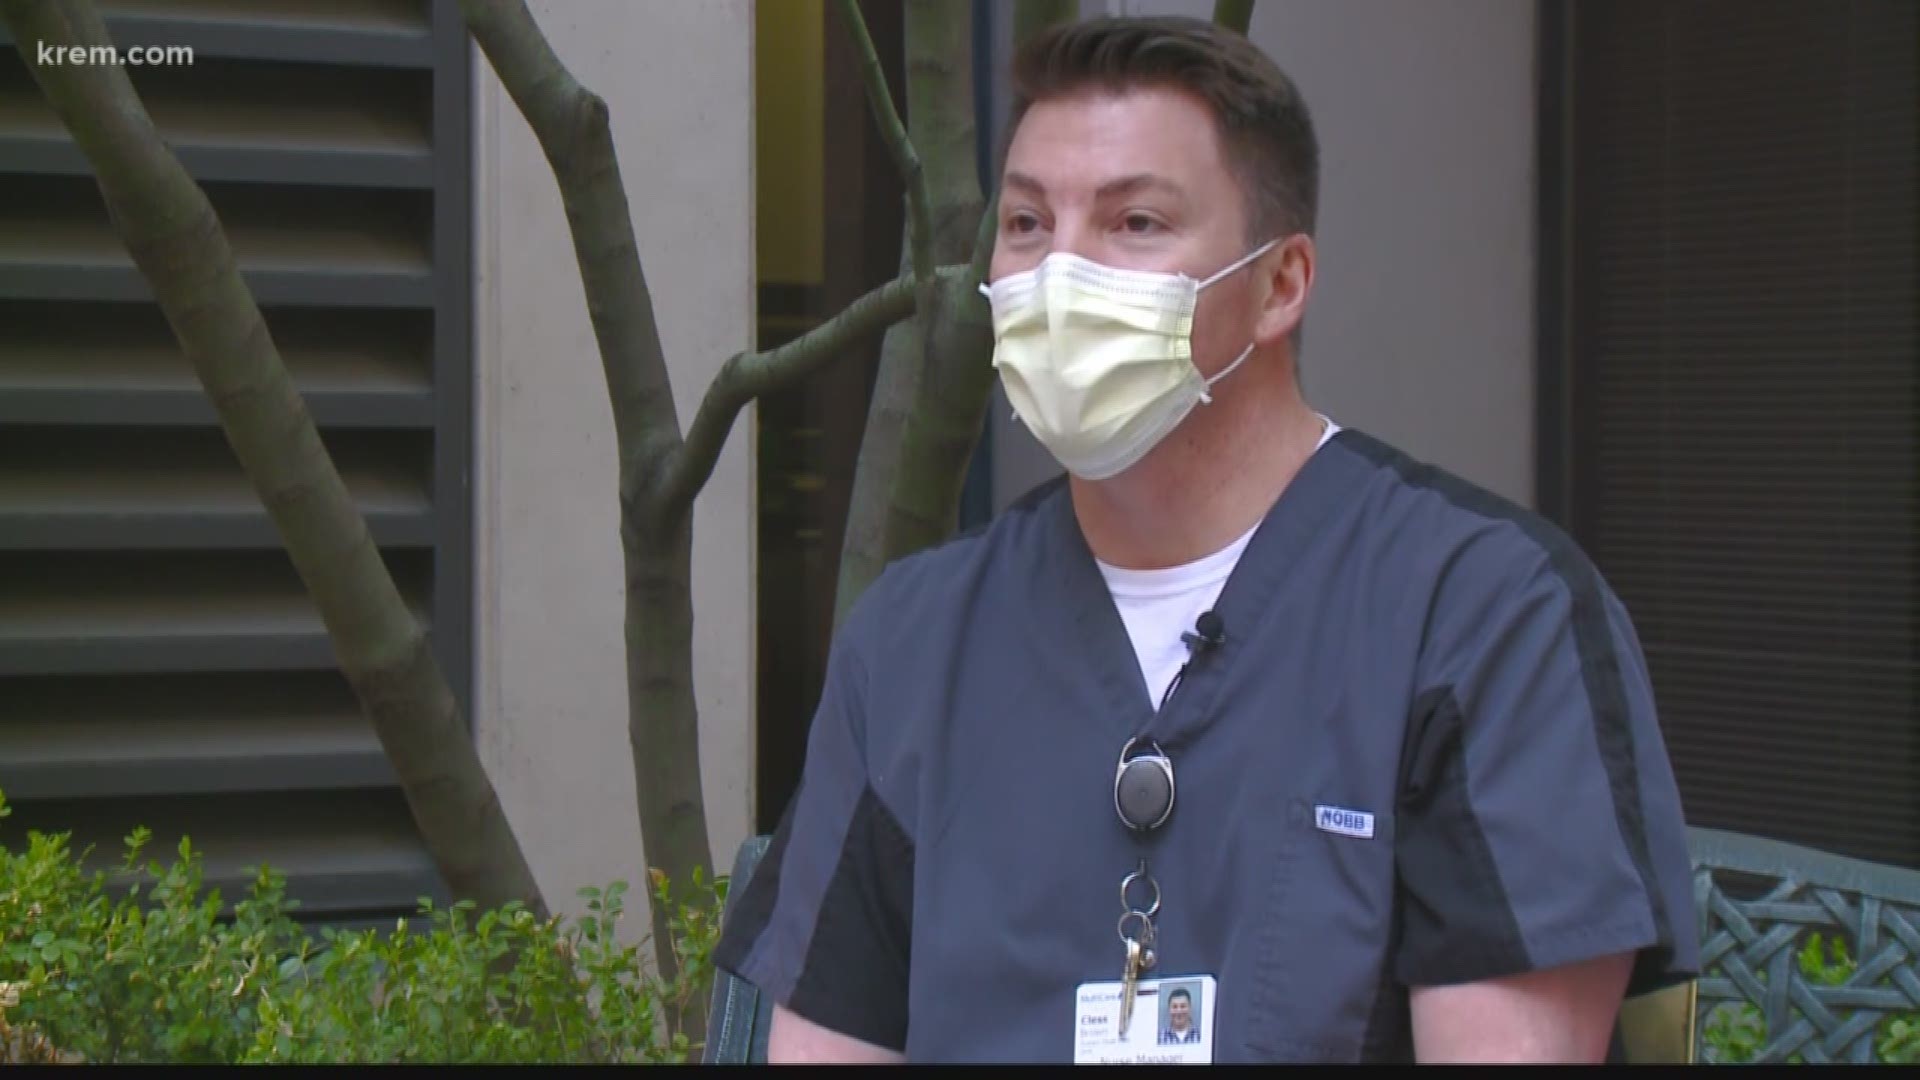 Wednesday is National Nurses Day during National Nurses Appreciation Week. KREM spoke with a local nurse on the front lines of the coronavirus pandemic.